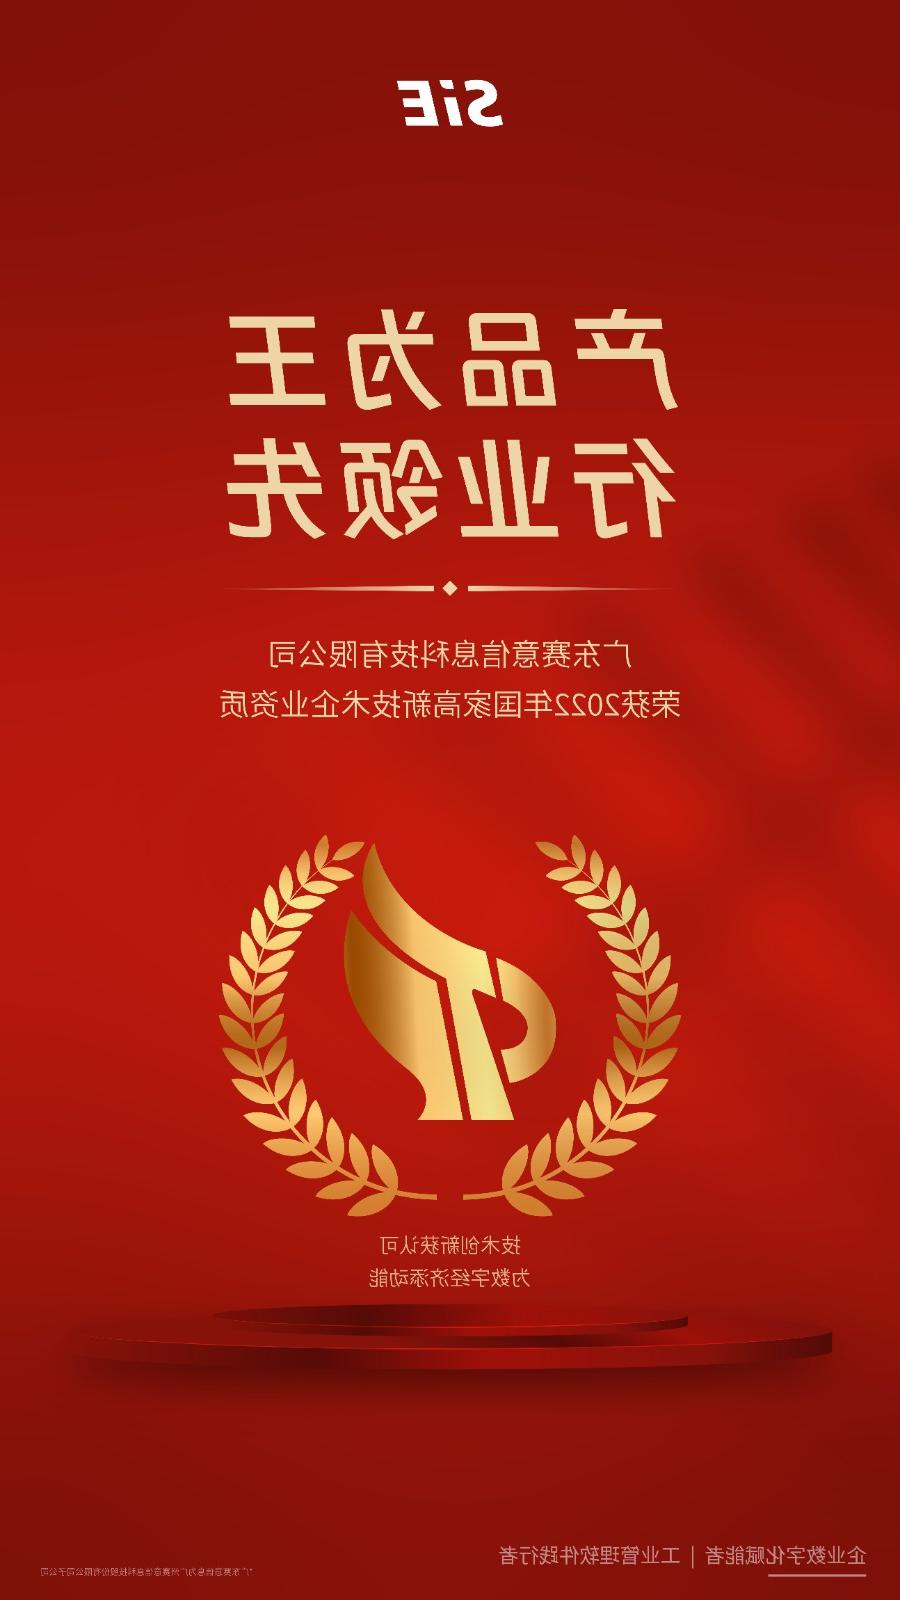 National level qualification and honor! Guangdong Saiyi Information Technology Co., Ltd. has been re